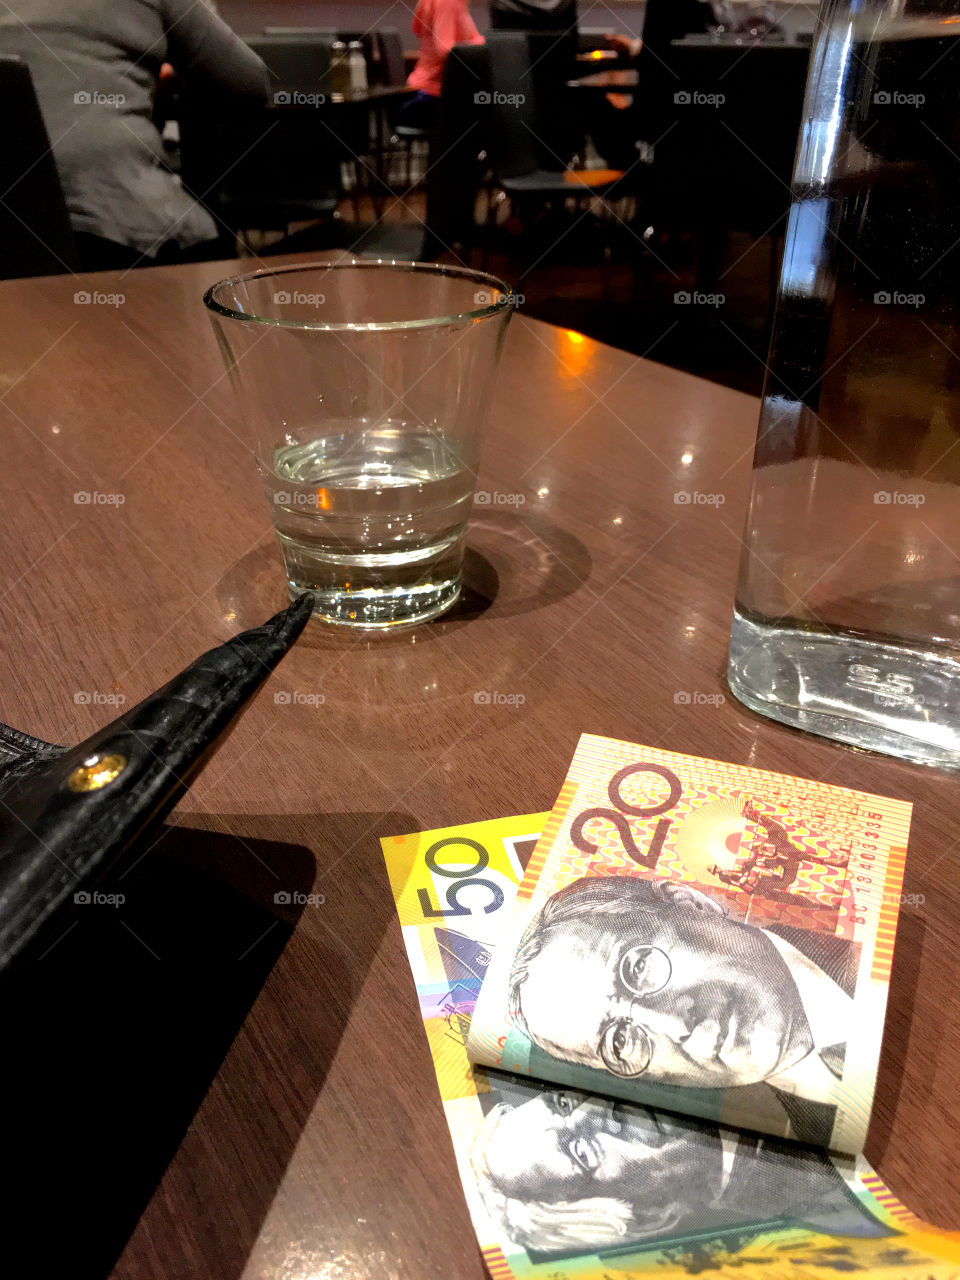 Paying a restaurant bill in Australian restaurant, Australian currency, wallet, credit cards